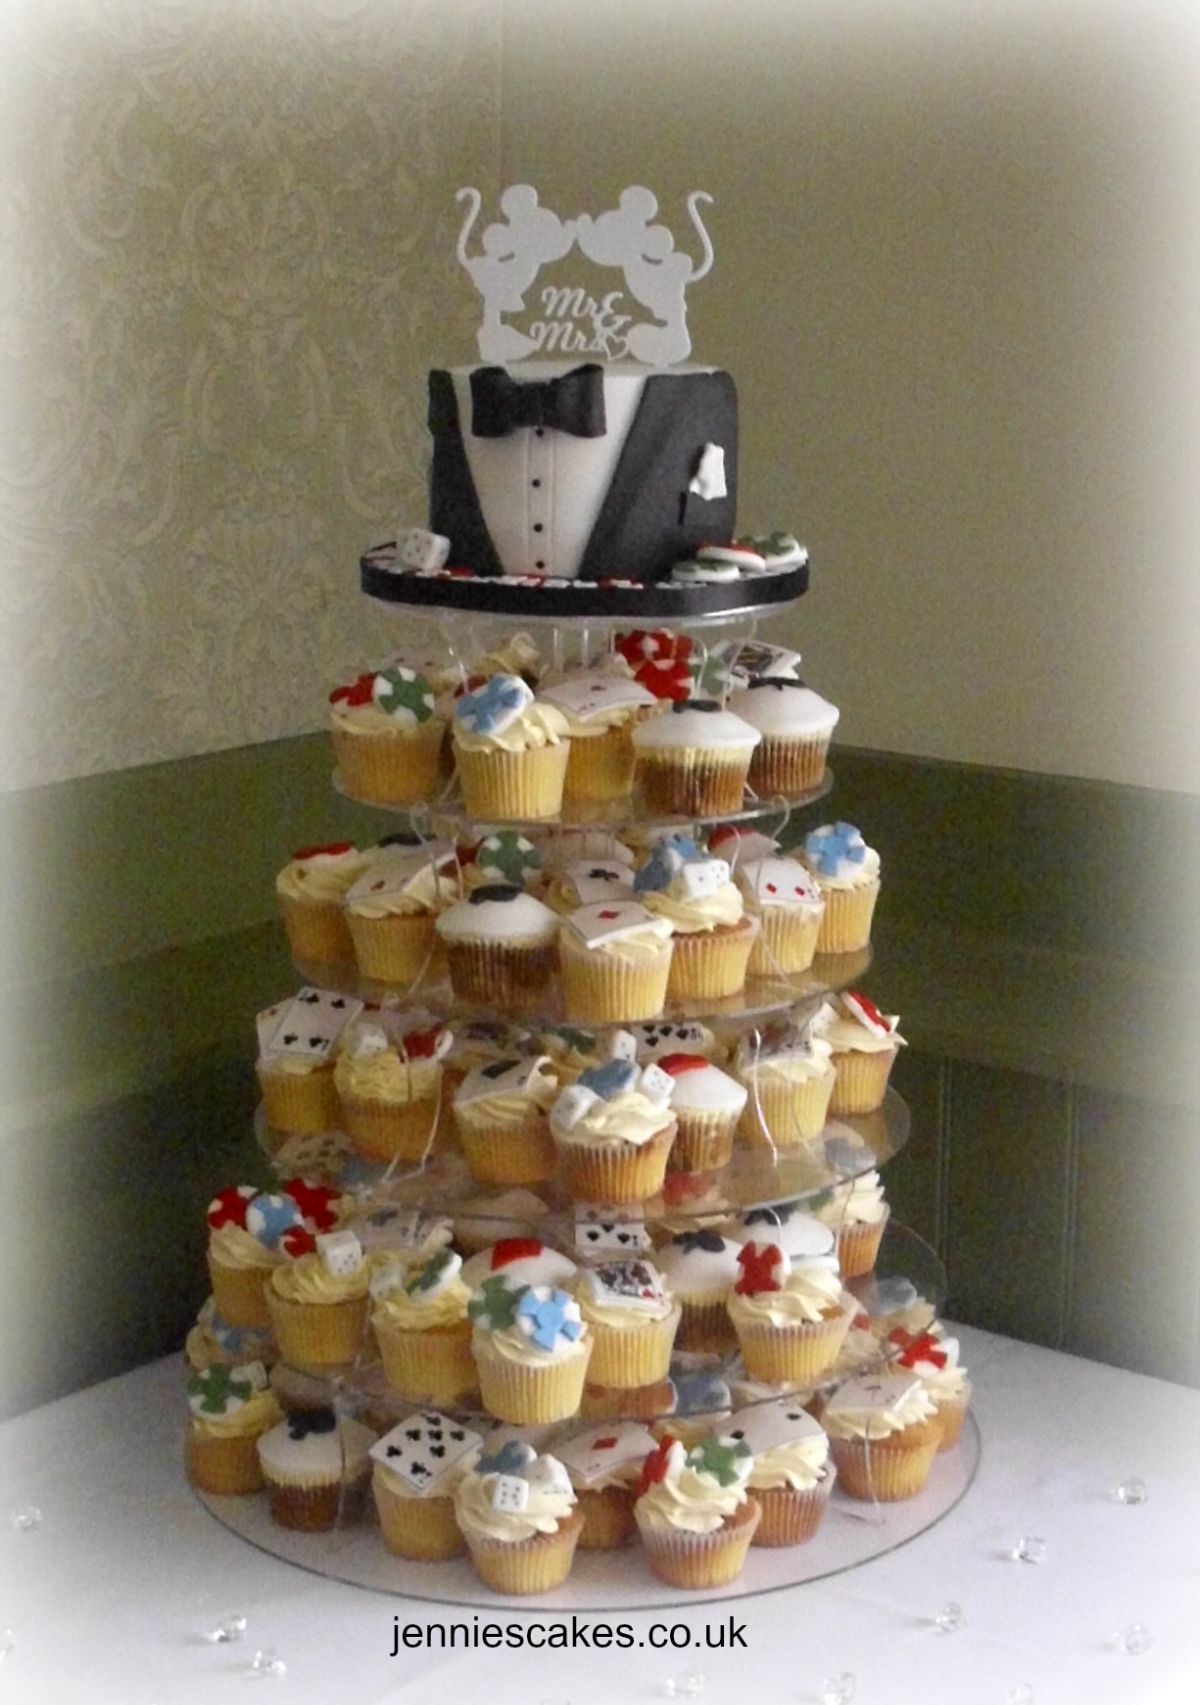 Jennie's cake's and catering-Image-31